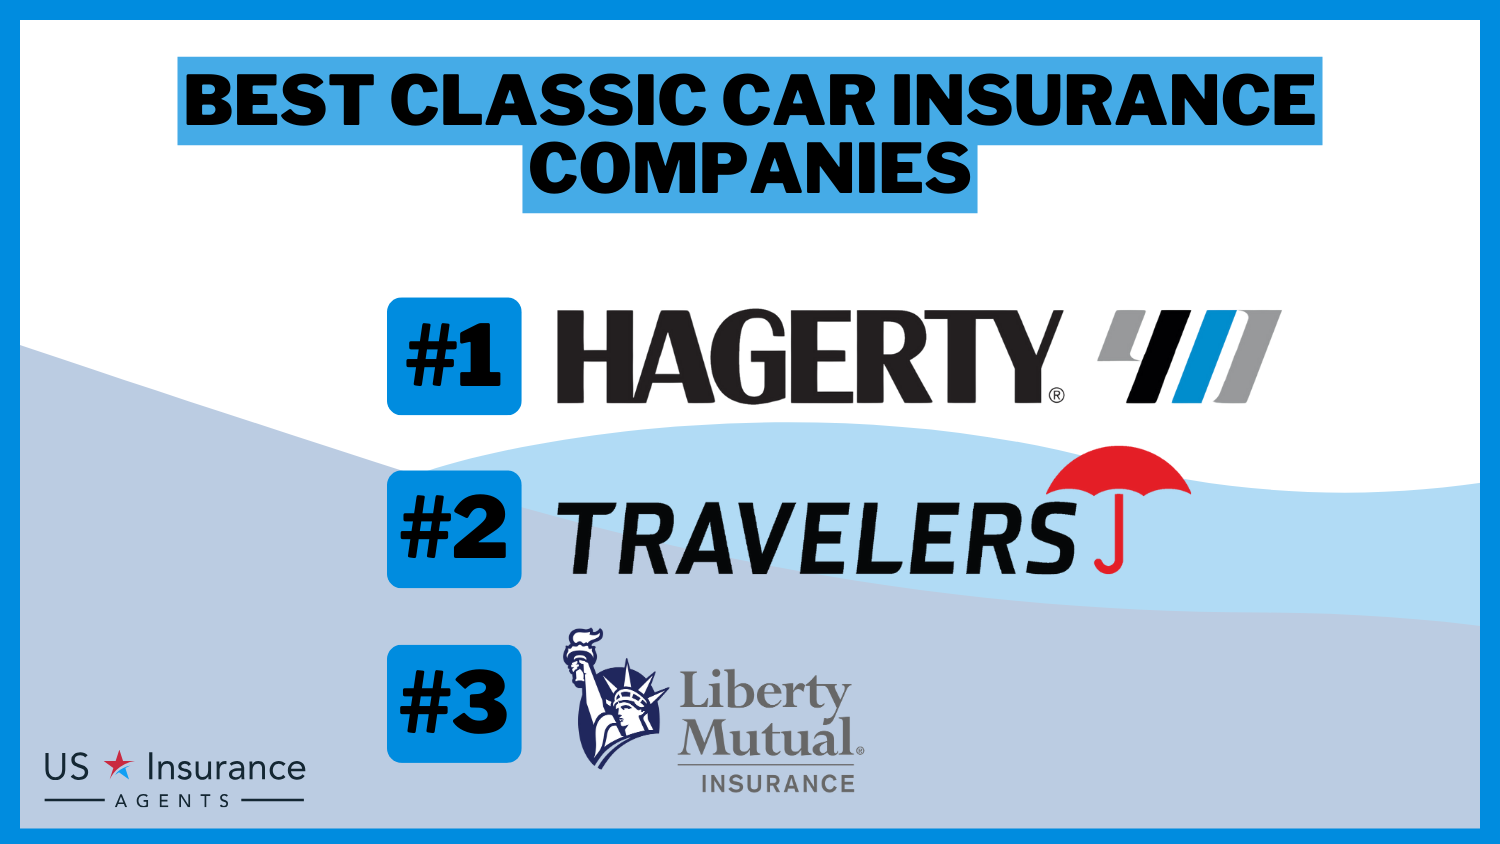 Best Classic Car Insurance Companies: Hagerty, Travelers, and Liberty Mutual.